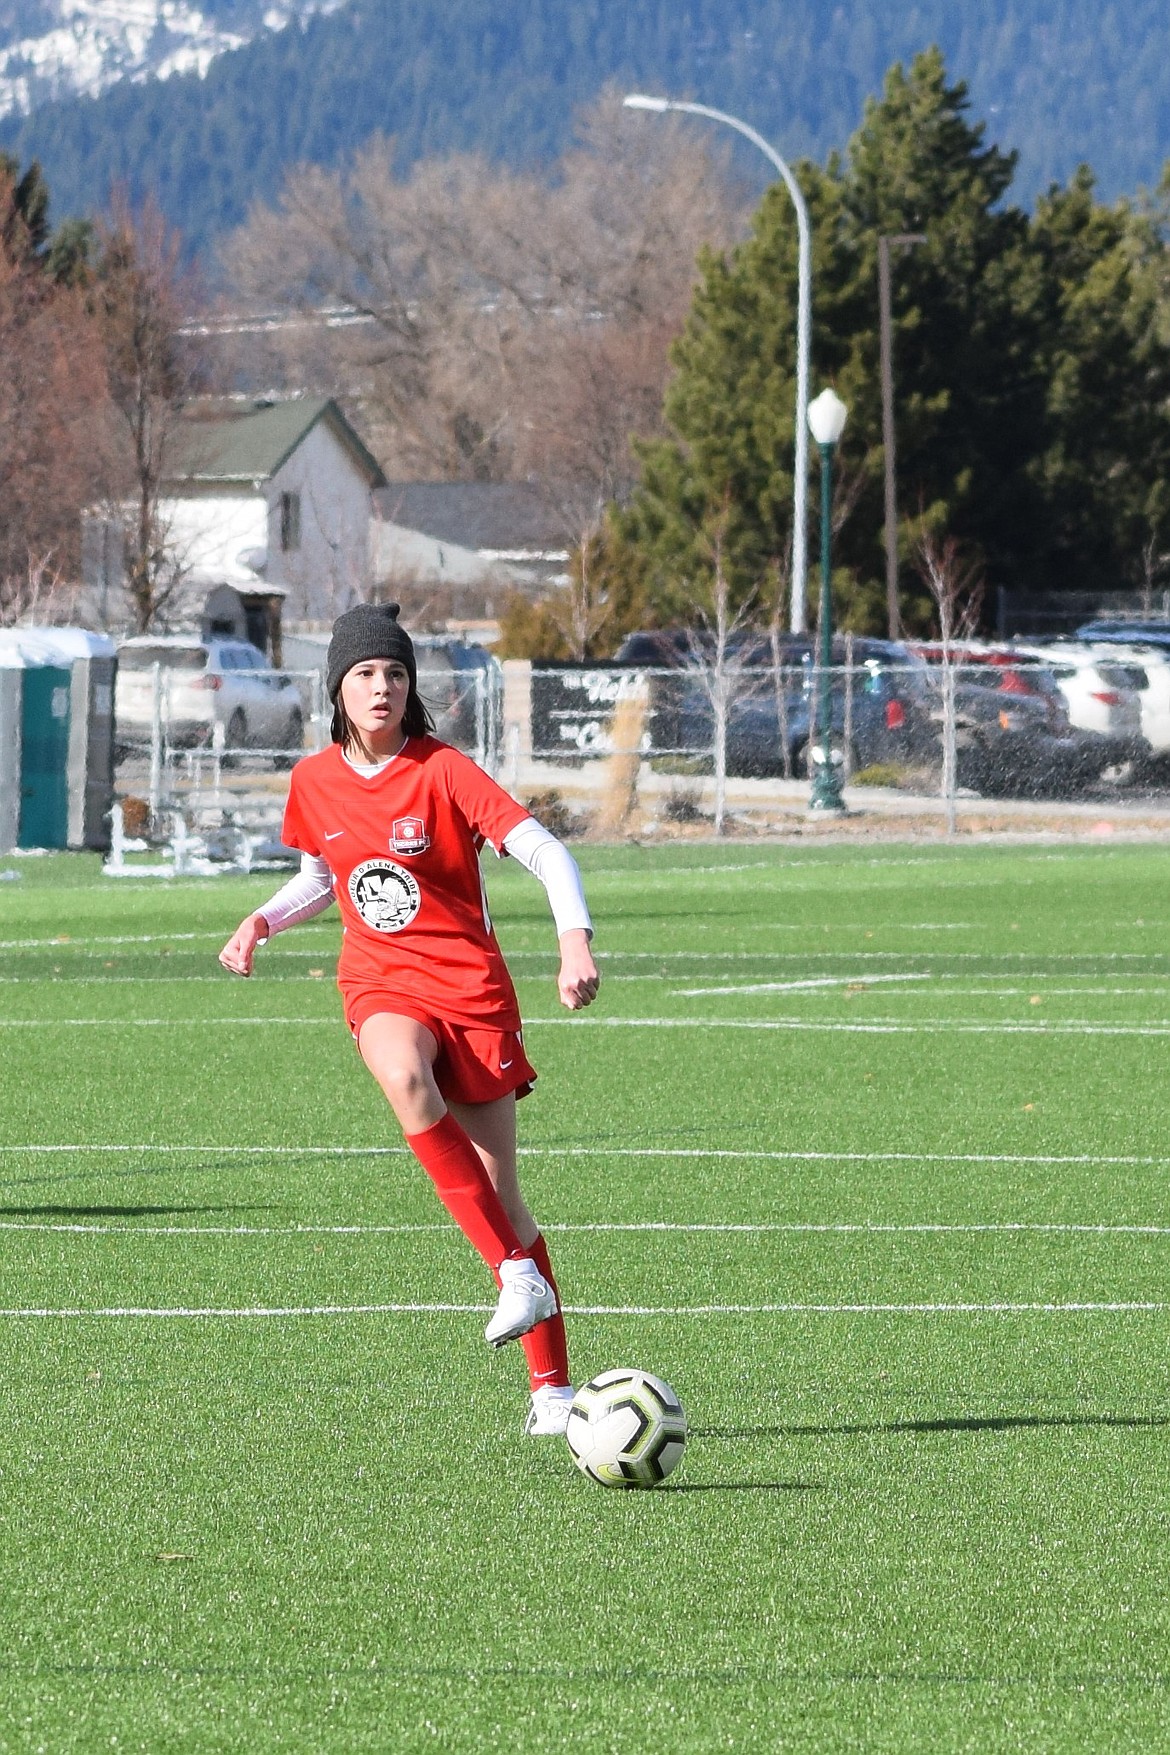 Courtesy photo
The Thorns North FC 07 Red girls soccer team defeated the 05/06 Missoula Strikers 4-0. Goals were scored by Riley Brazle (Jamie Lawrence), Lily Bole (Ava Glahe), Lawrence (Ellie McGowan, pictured) and Natalie Thompson (McGowan). Liliana Brinkmeier notched the shutout in goal.